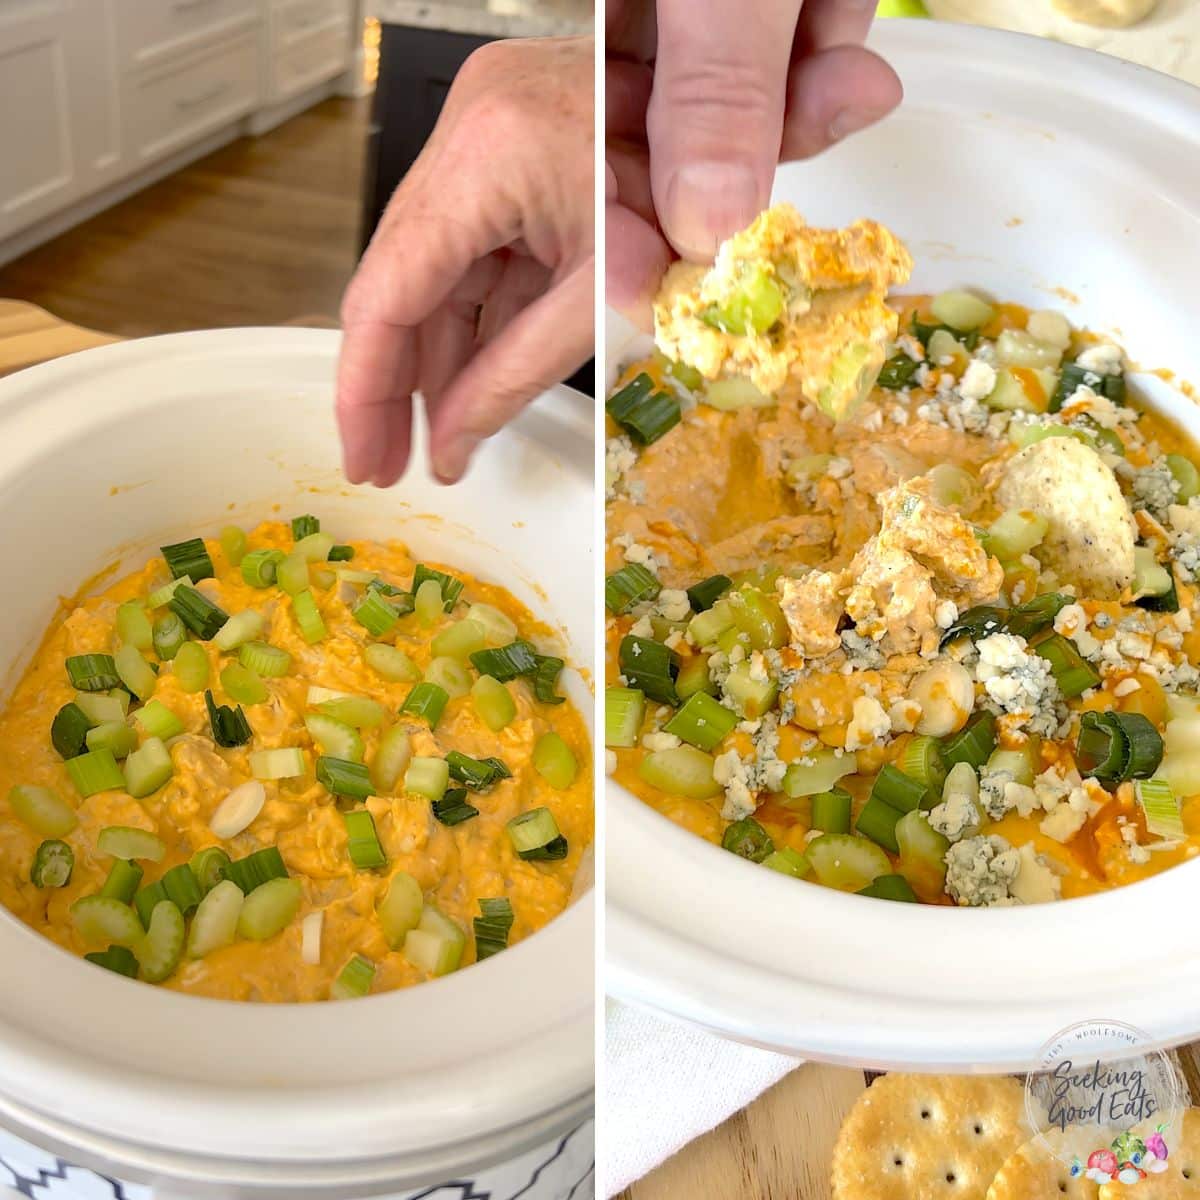 Topping the slow cooker buffalo chicken dip with fresh green onion and celery. Serving with a chip.